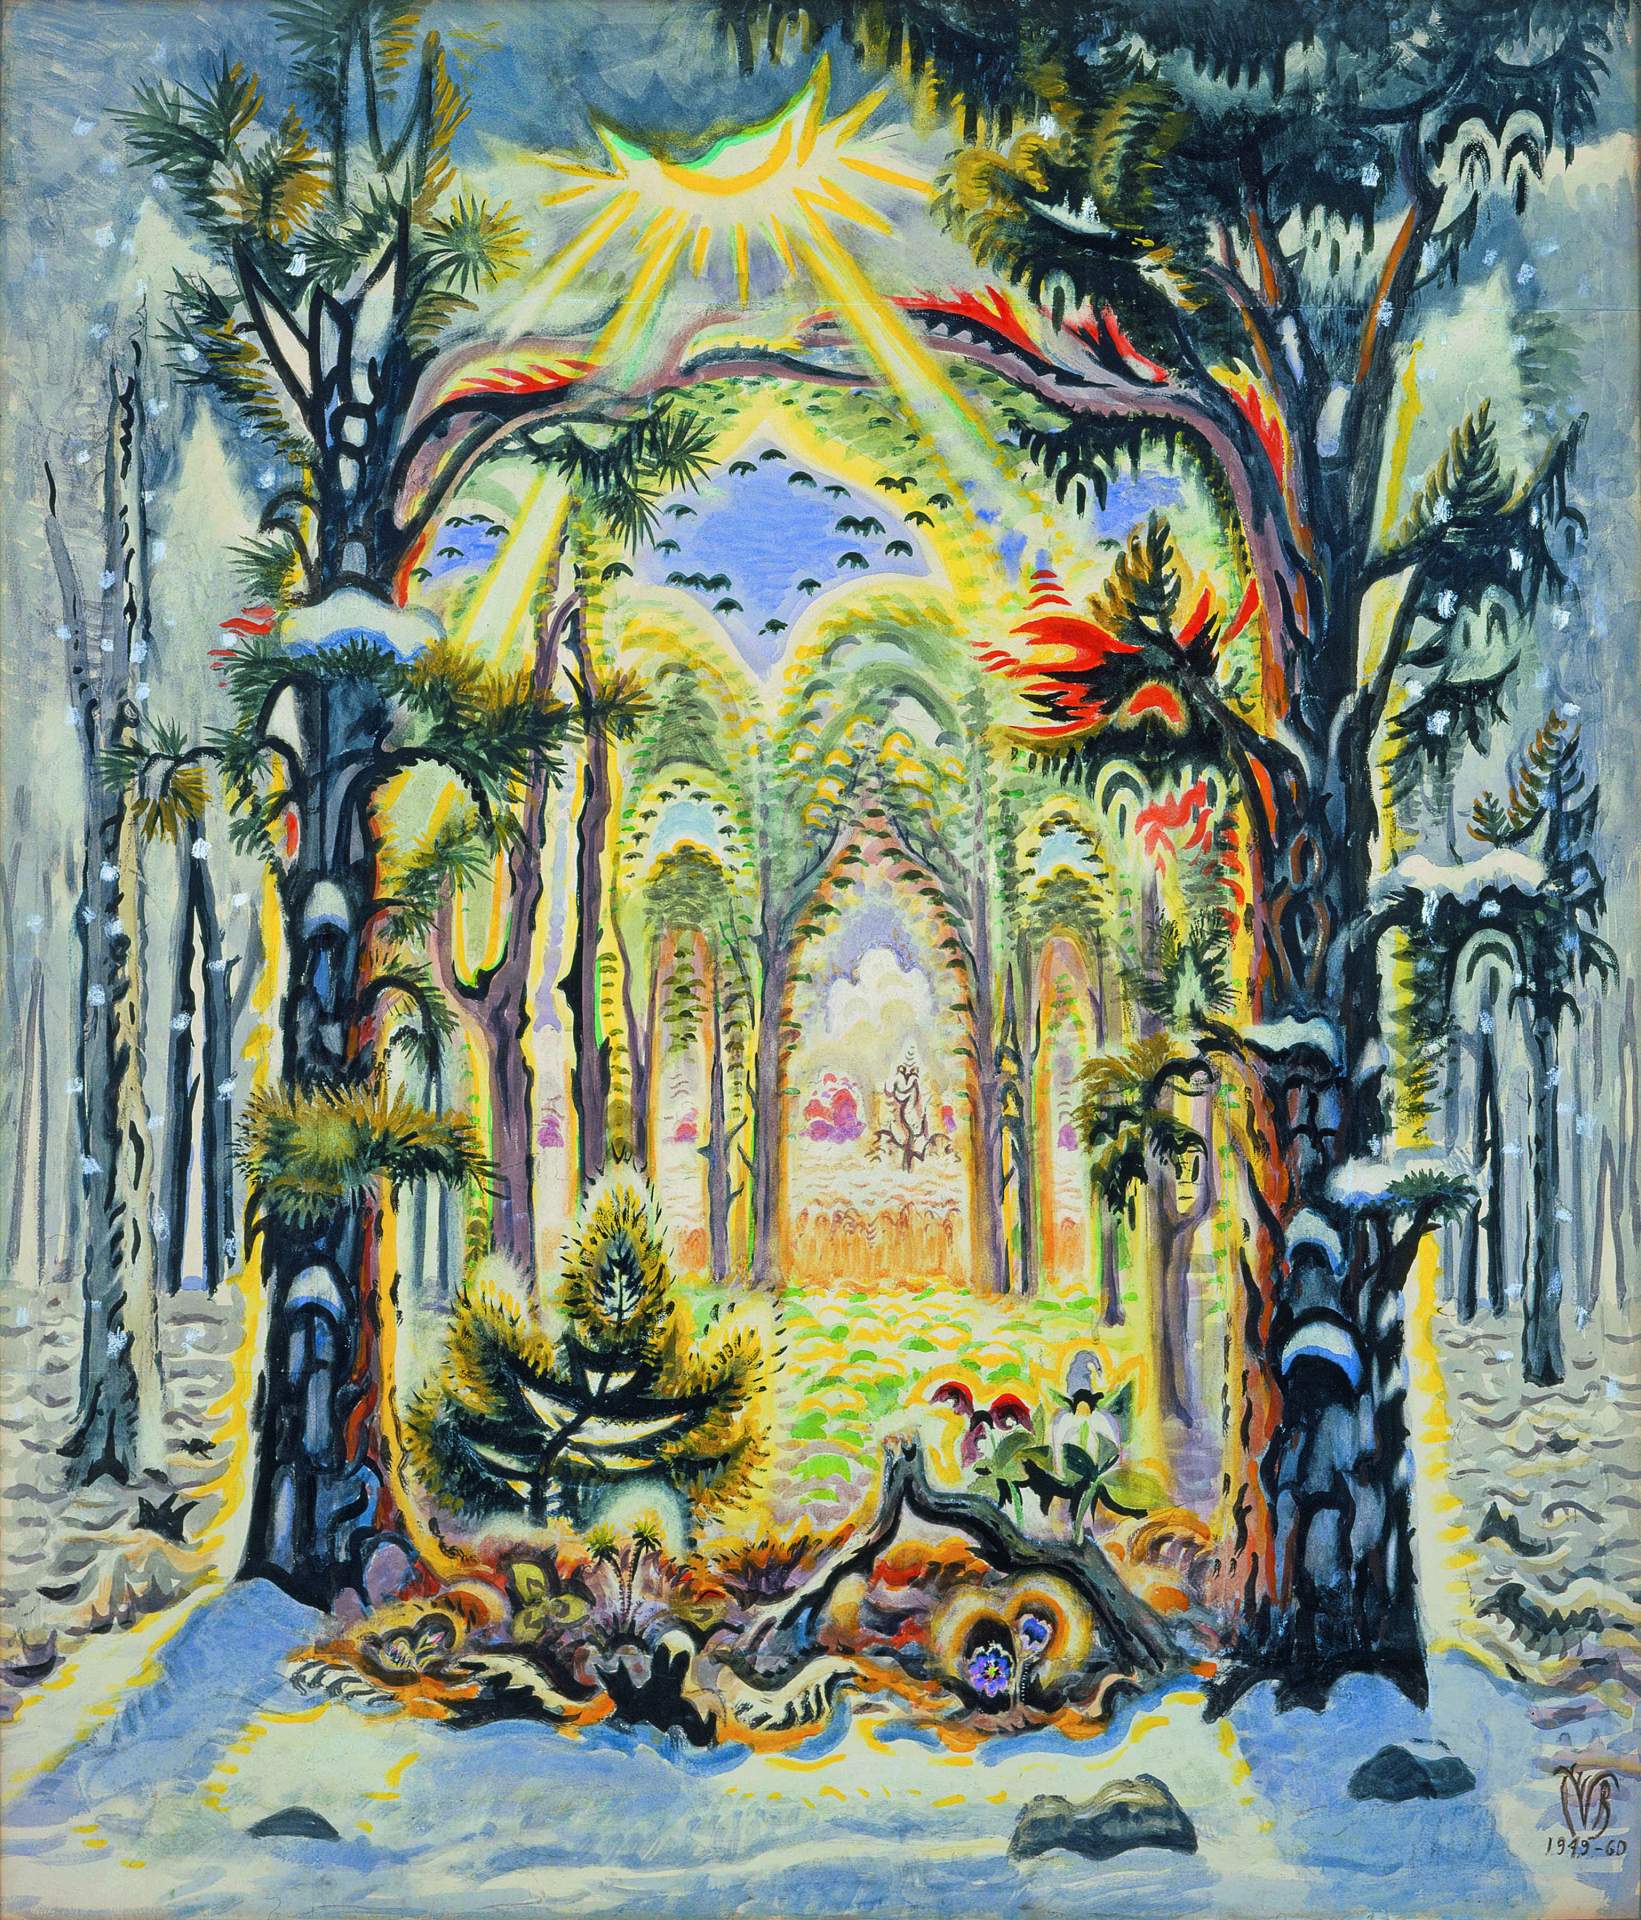 Blistering Vision: Charles Burchfield’s Sublime American Landscapes in The Public